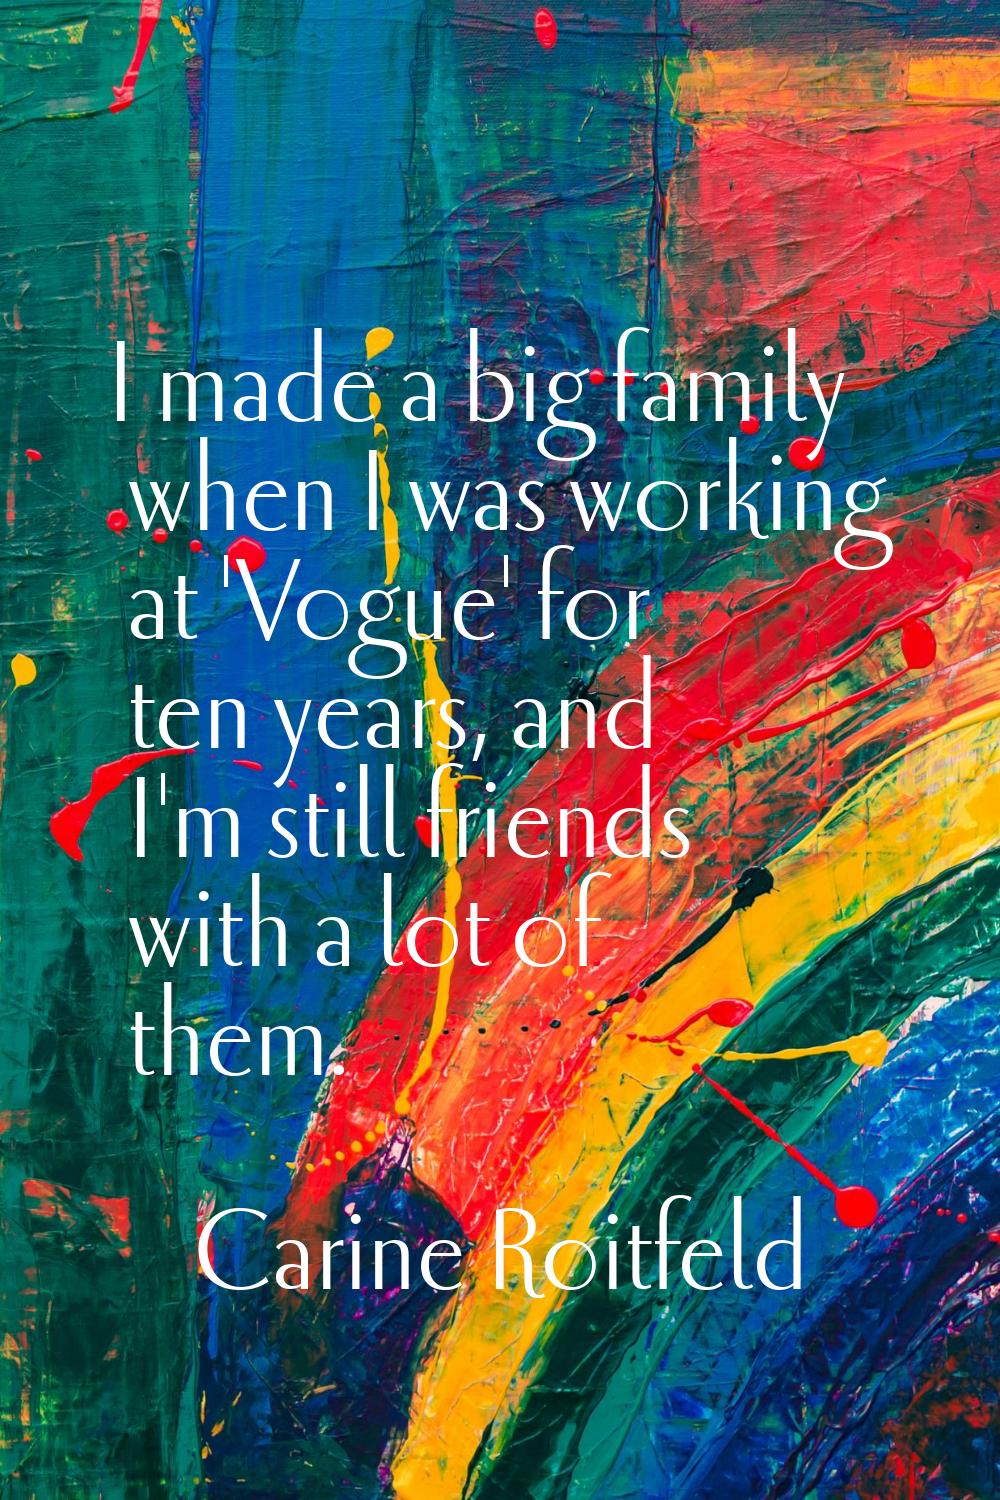 I made a big family when I was working at 'Vogue' for ten years, and I'm still friends with a lot o